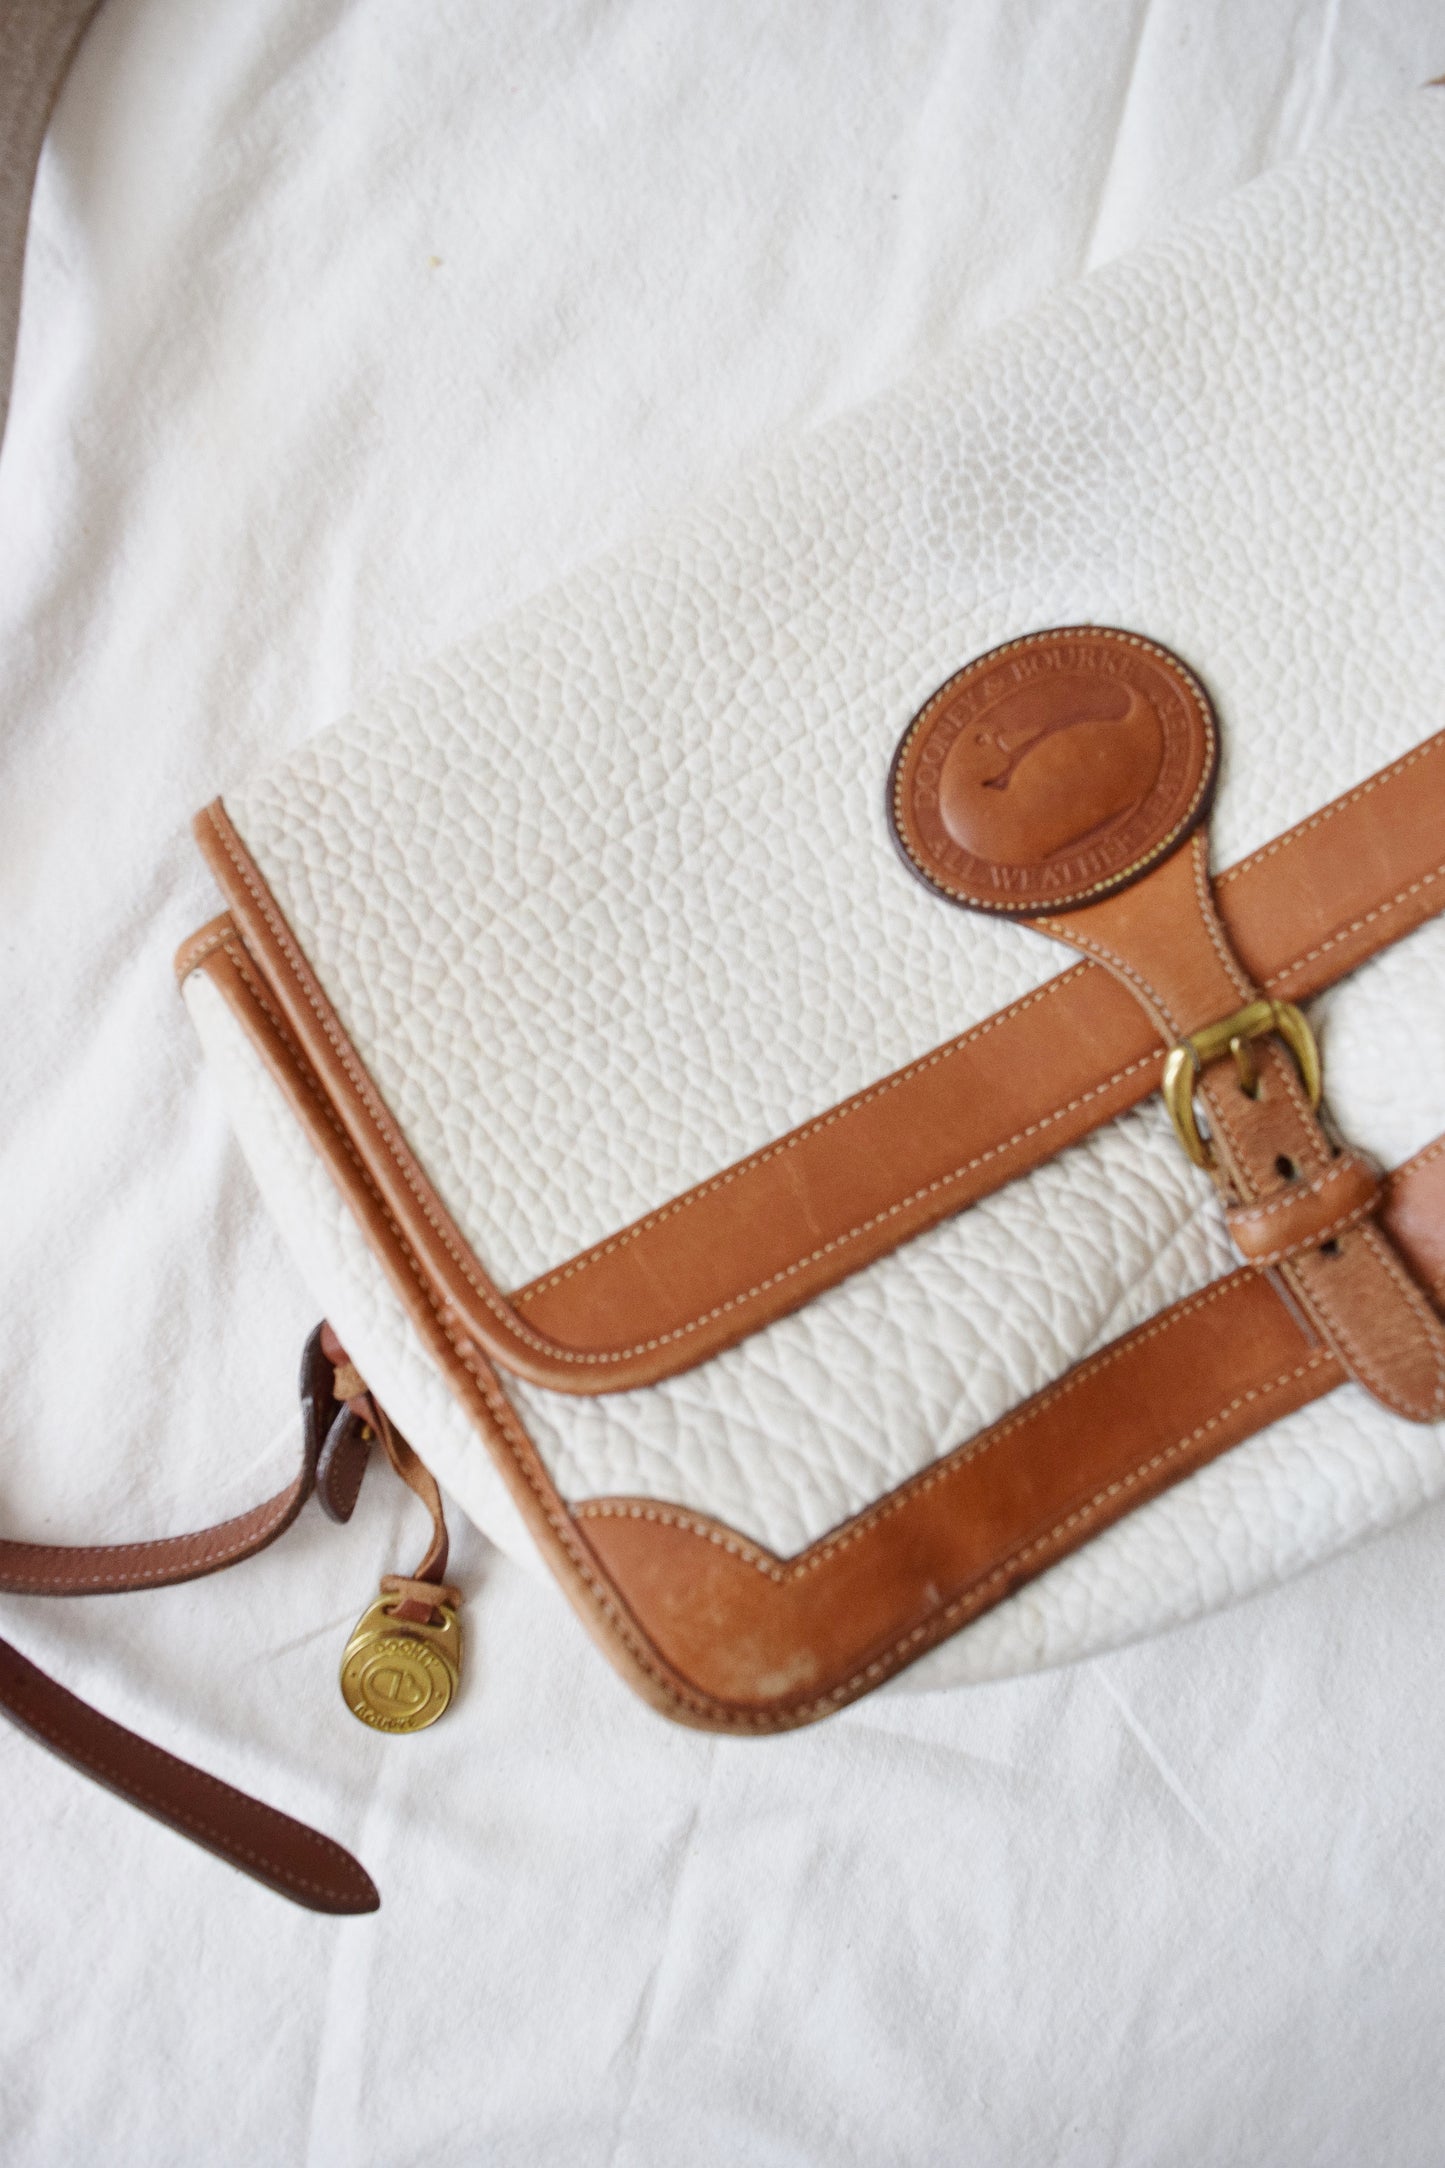 Vintage Dooney & Bourke All Weather Leather Crossbody Bag / Purse in White and British Tan